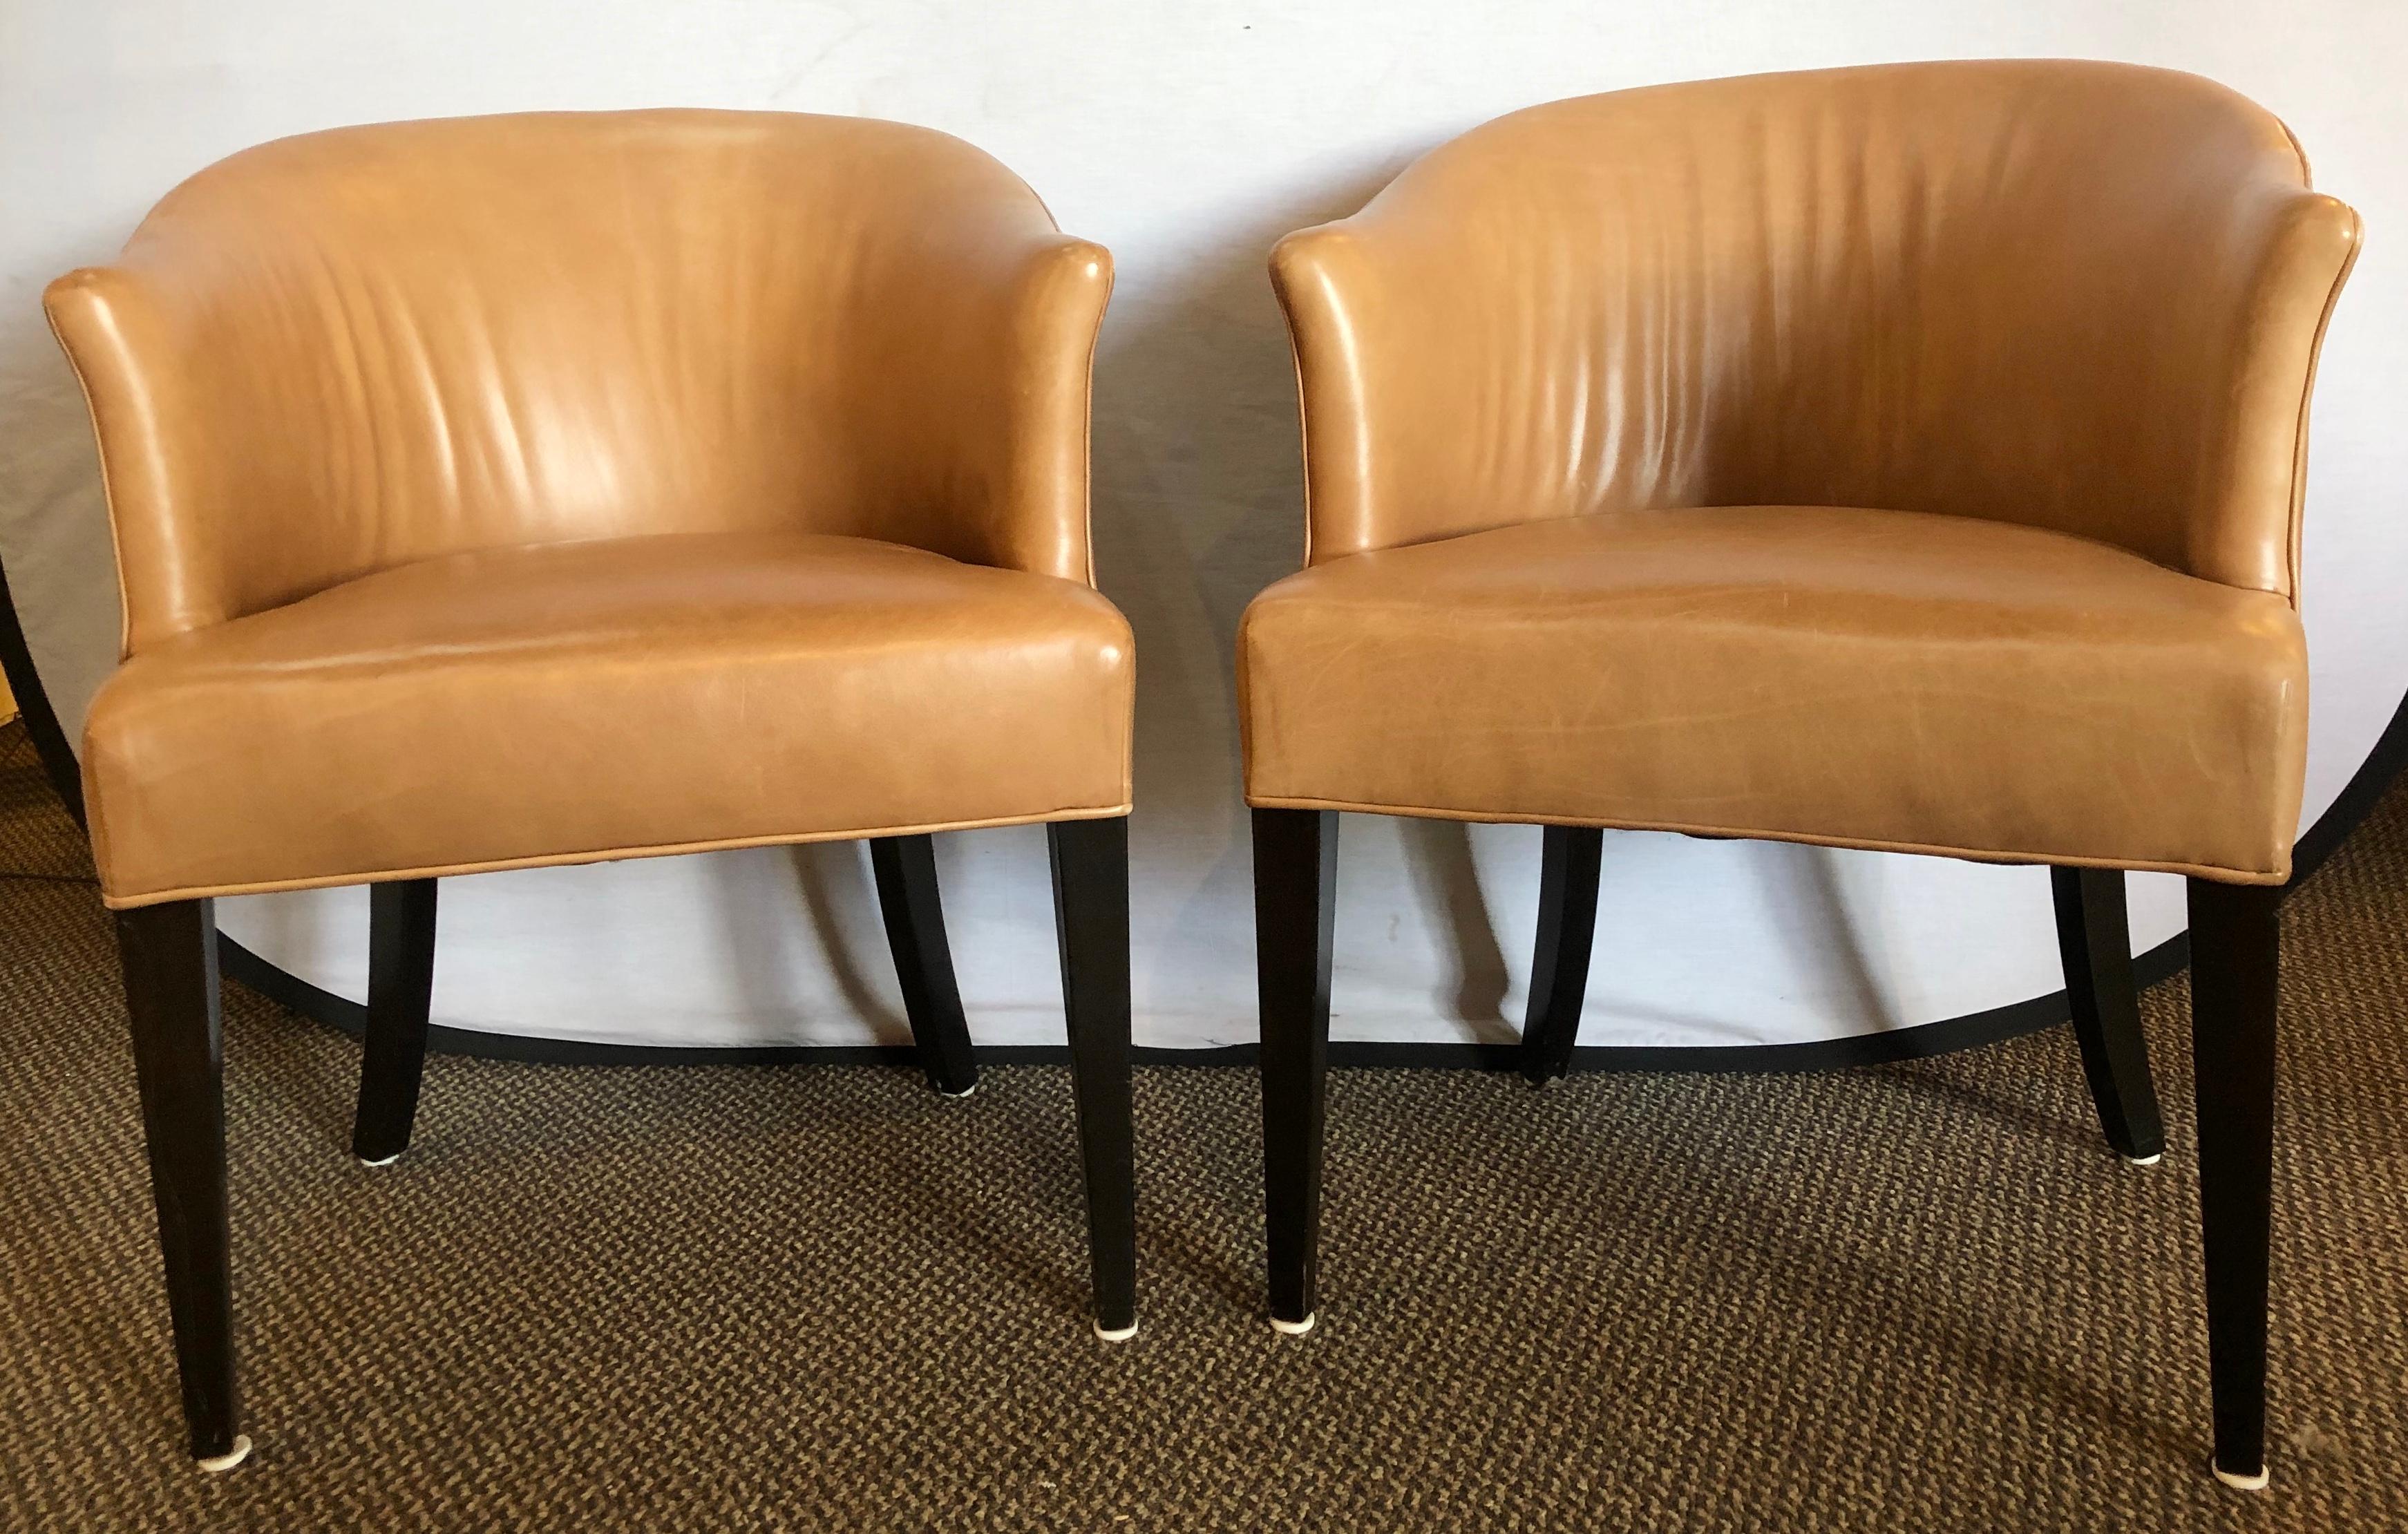 Six Edward Wormley Dining Chairs. Mid-Century Modern Leather Upholstered 1